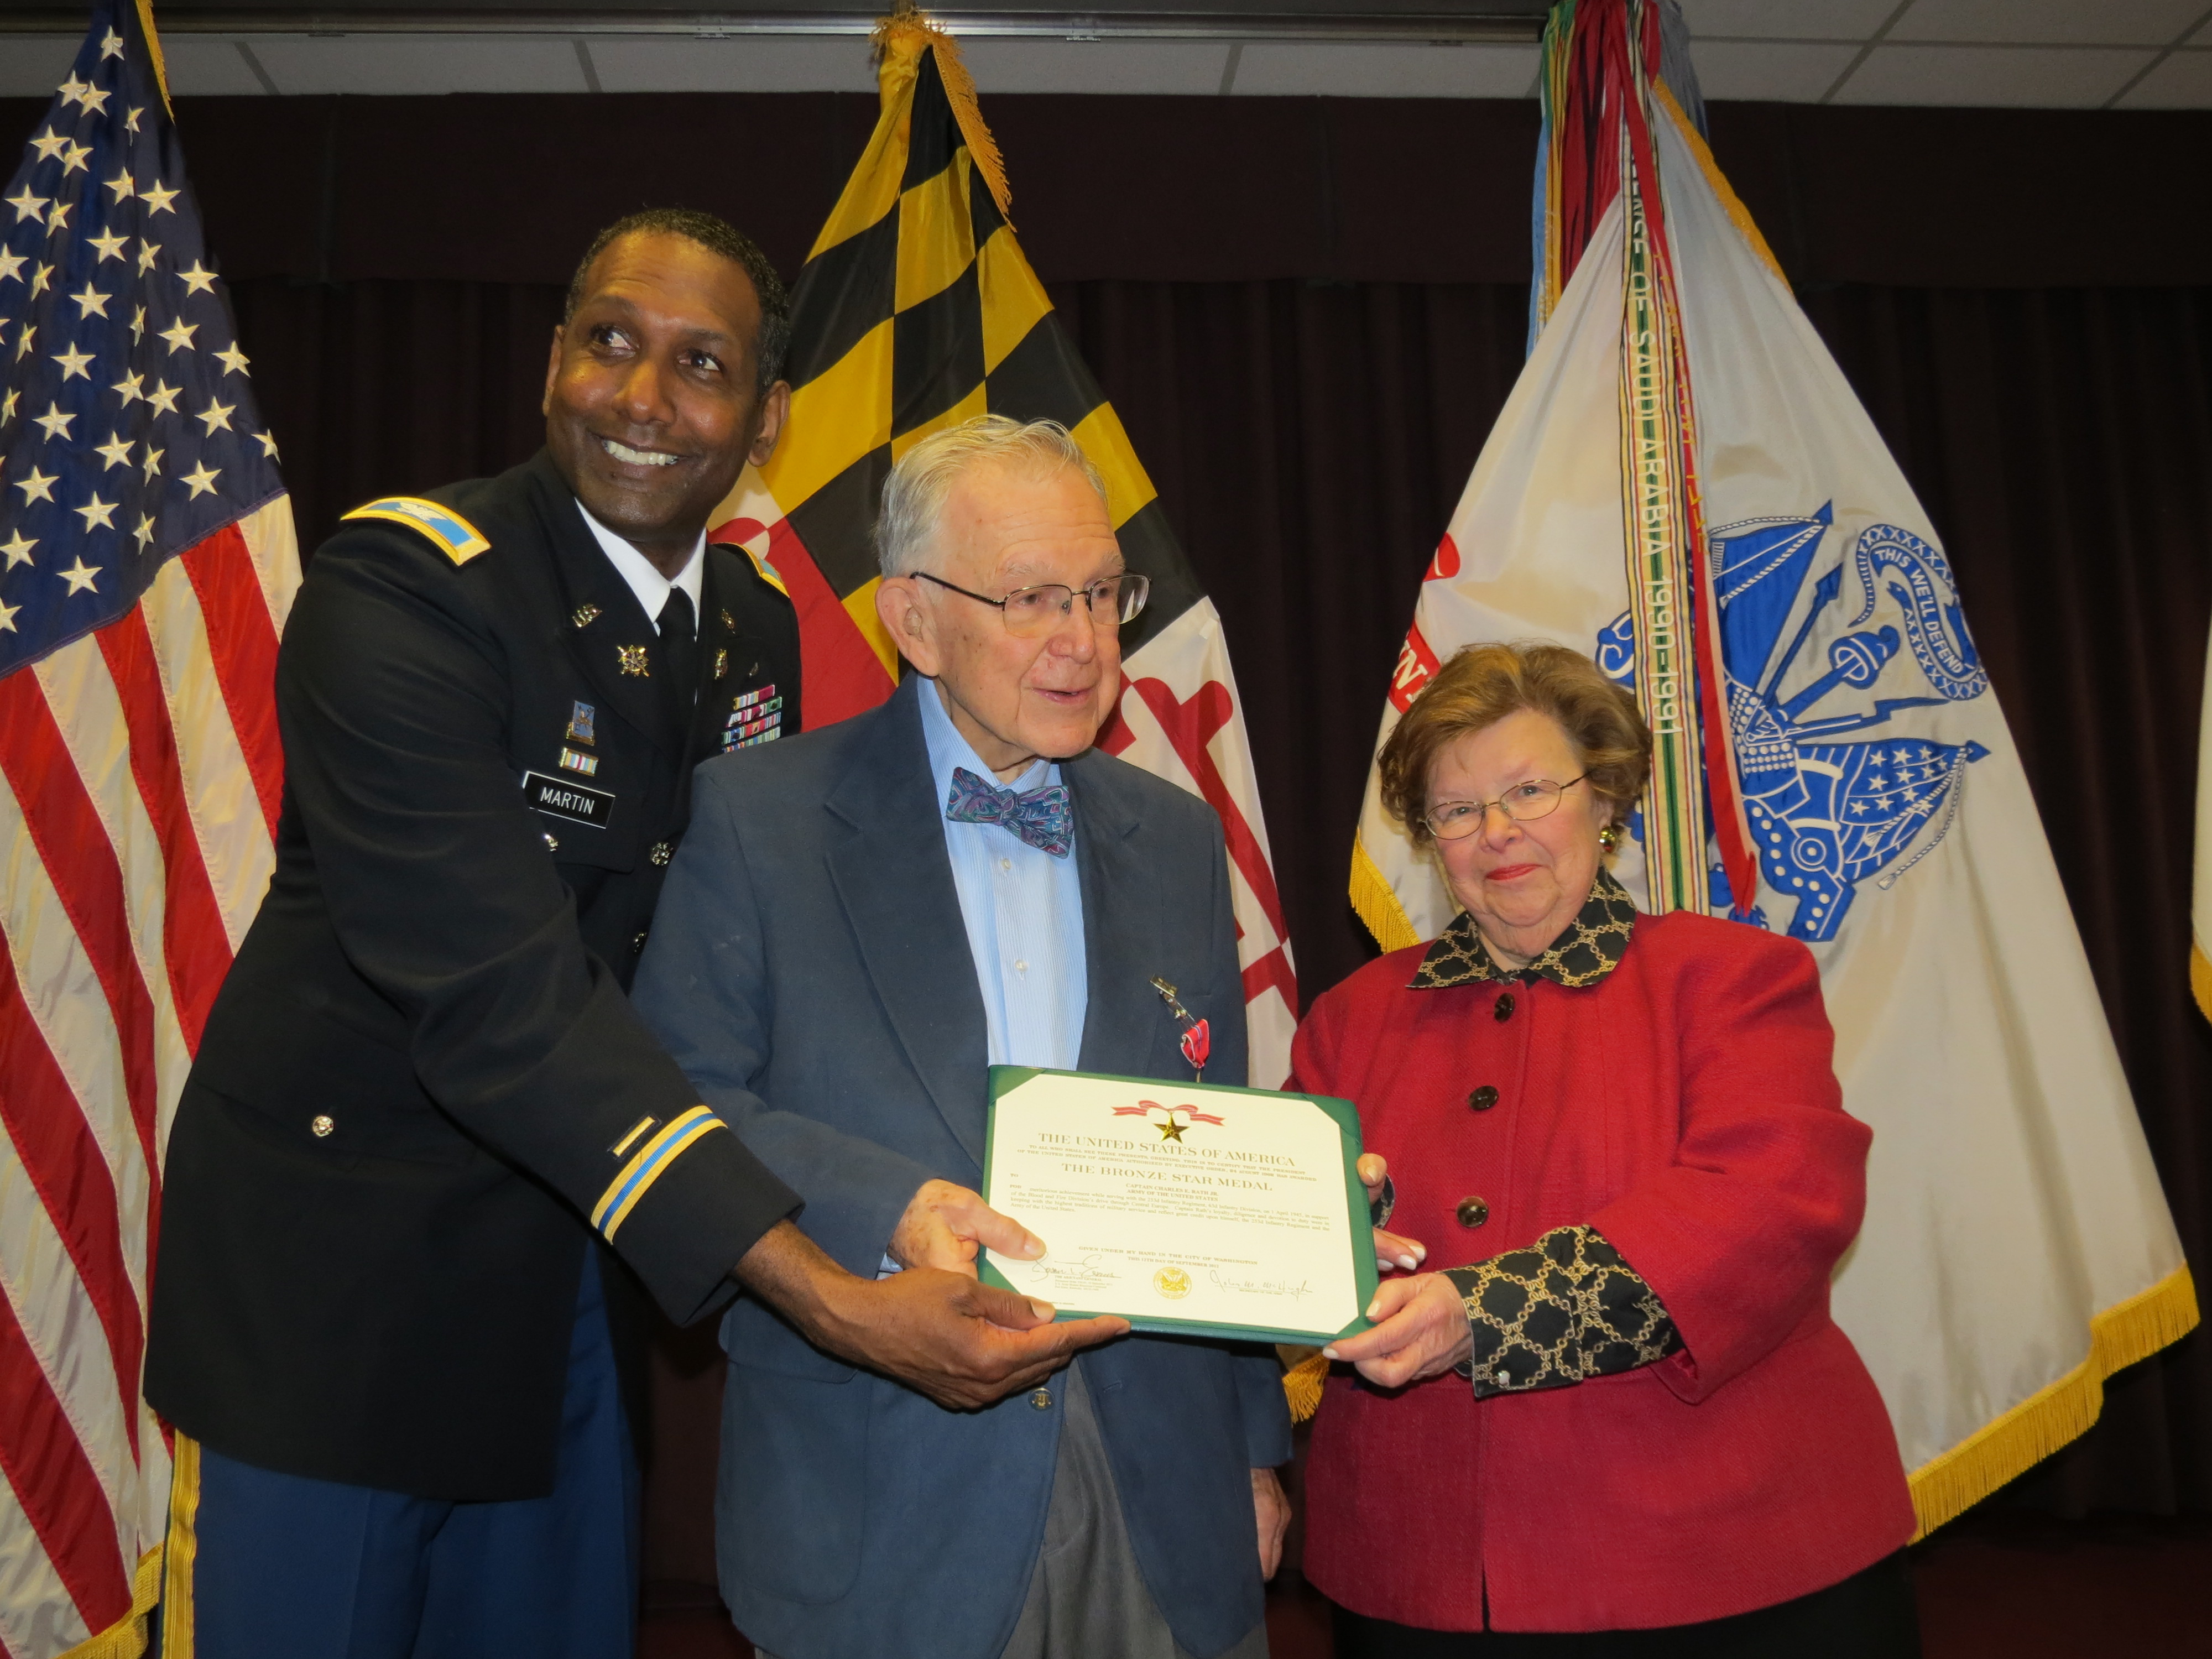 Dr. Charles Rath is presented a Bronze Star for service during WWII by Senator Mikulski and Col. Jeremy Martin.